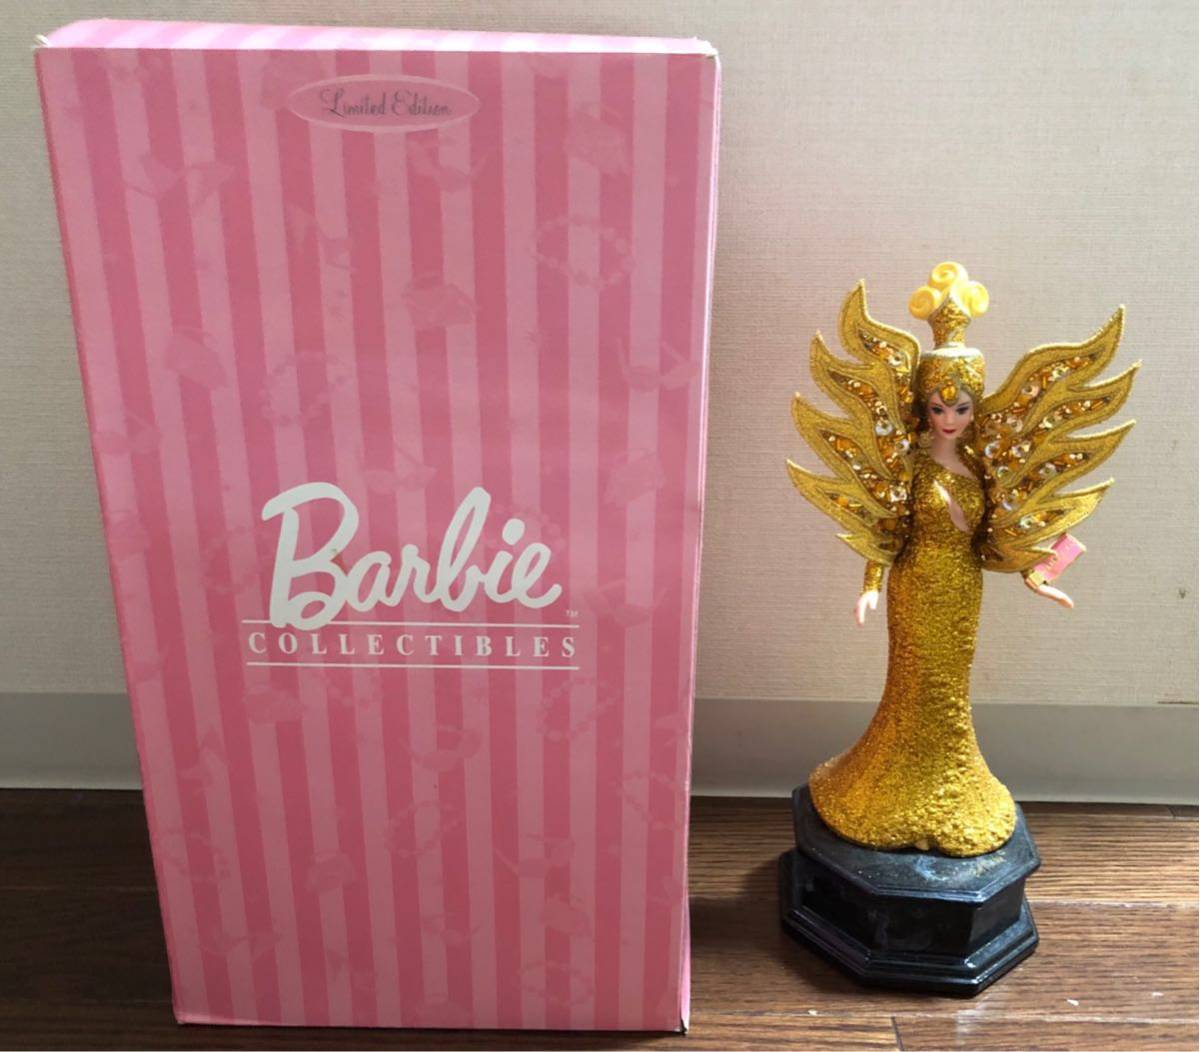 Barbie COLLECTIBLES Limited Edition 265470 Goddess Of The Sun Bob Mackie musical Figurine Plays the tune Summer Windby Enesco